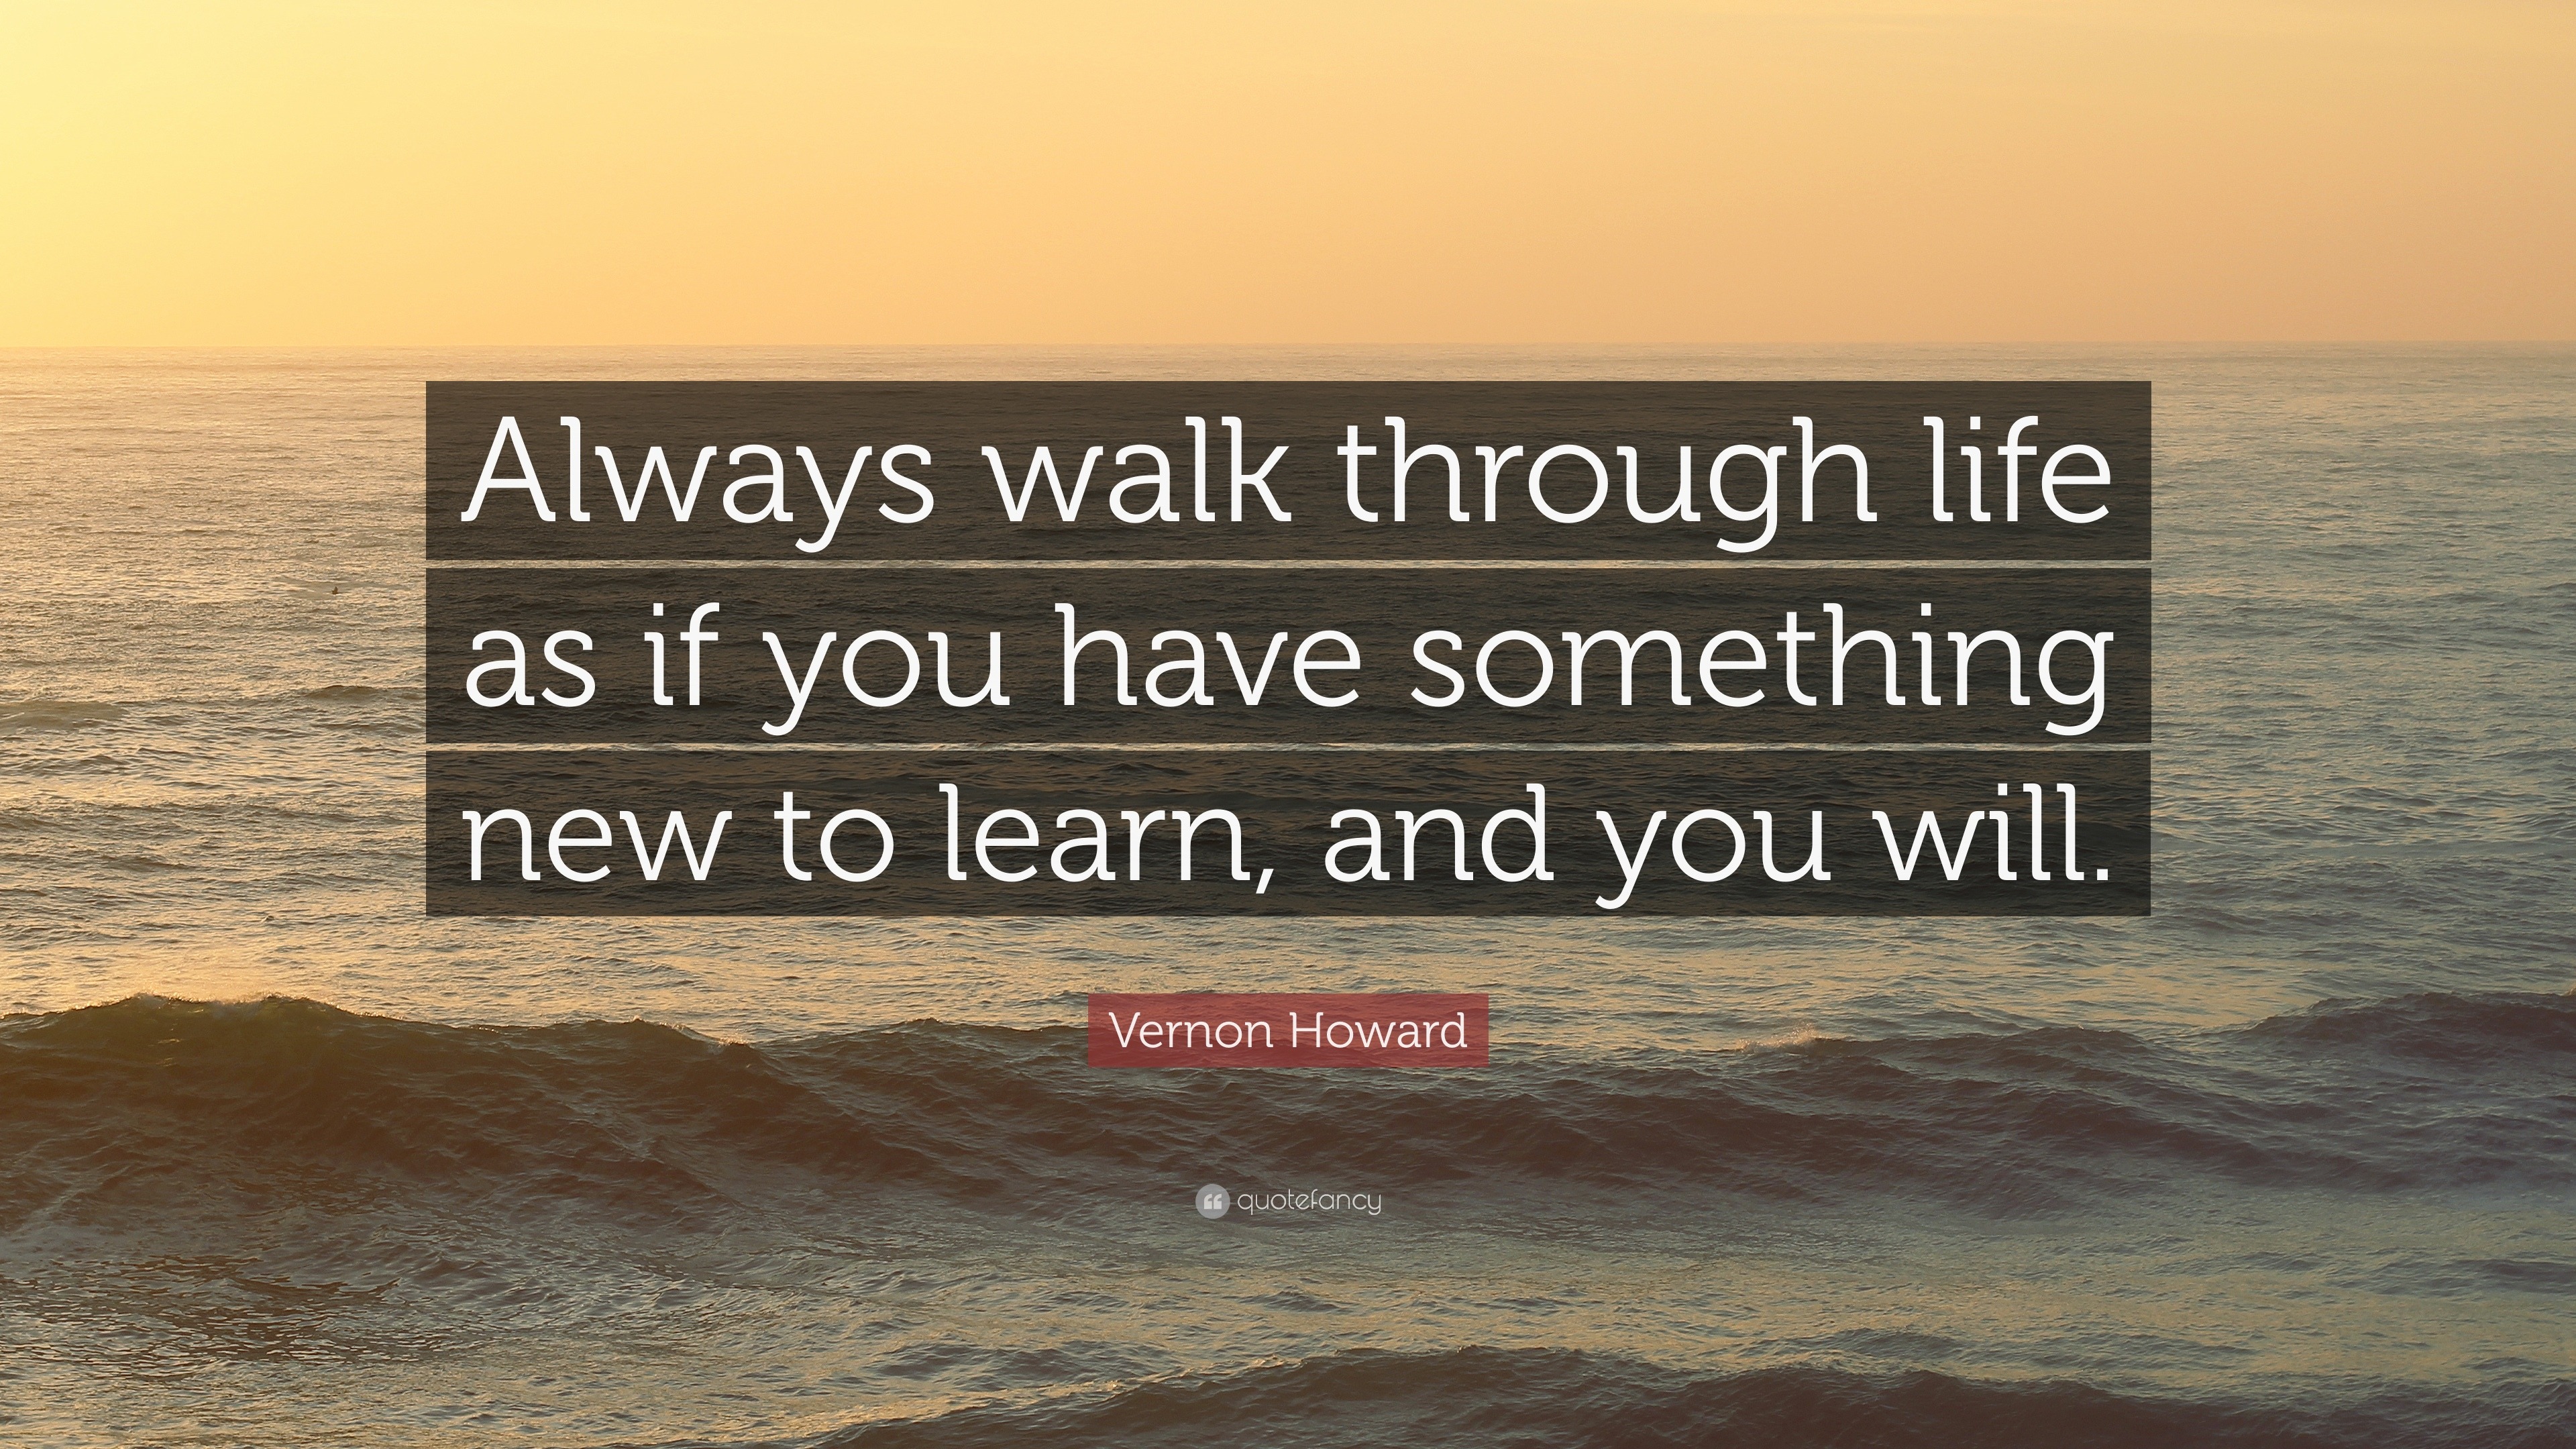 Vernon Howard Quote: “Always walk through life as if you have something ...